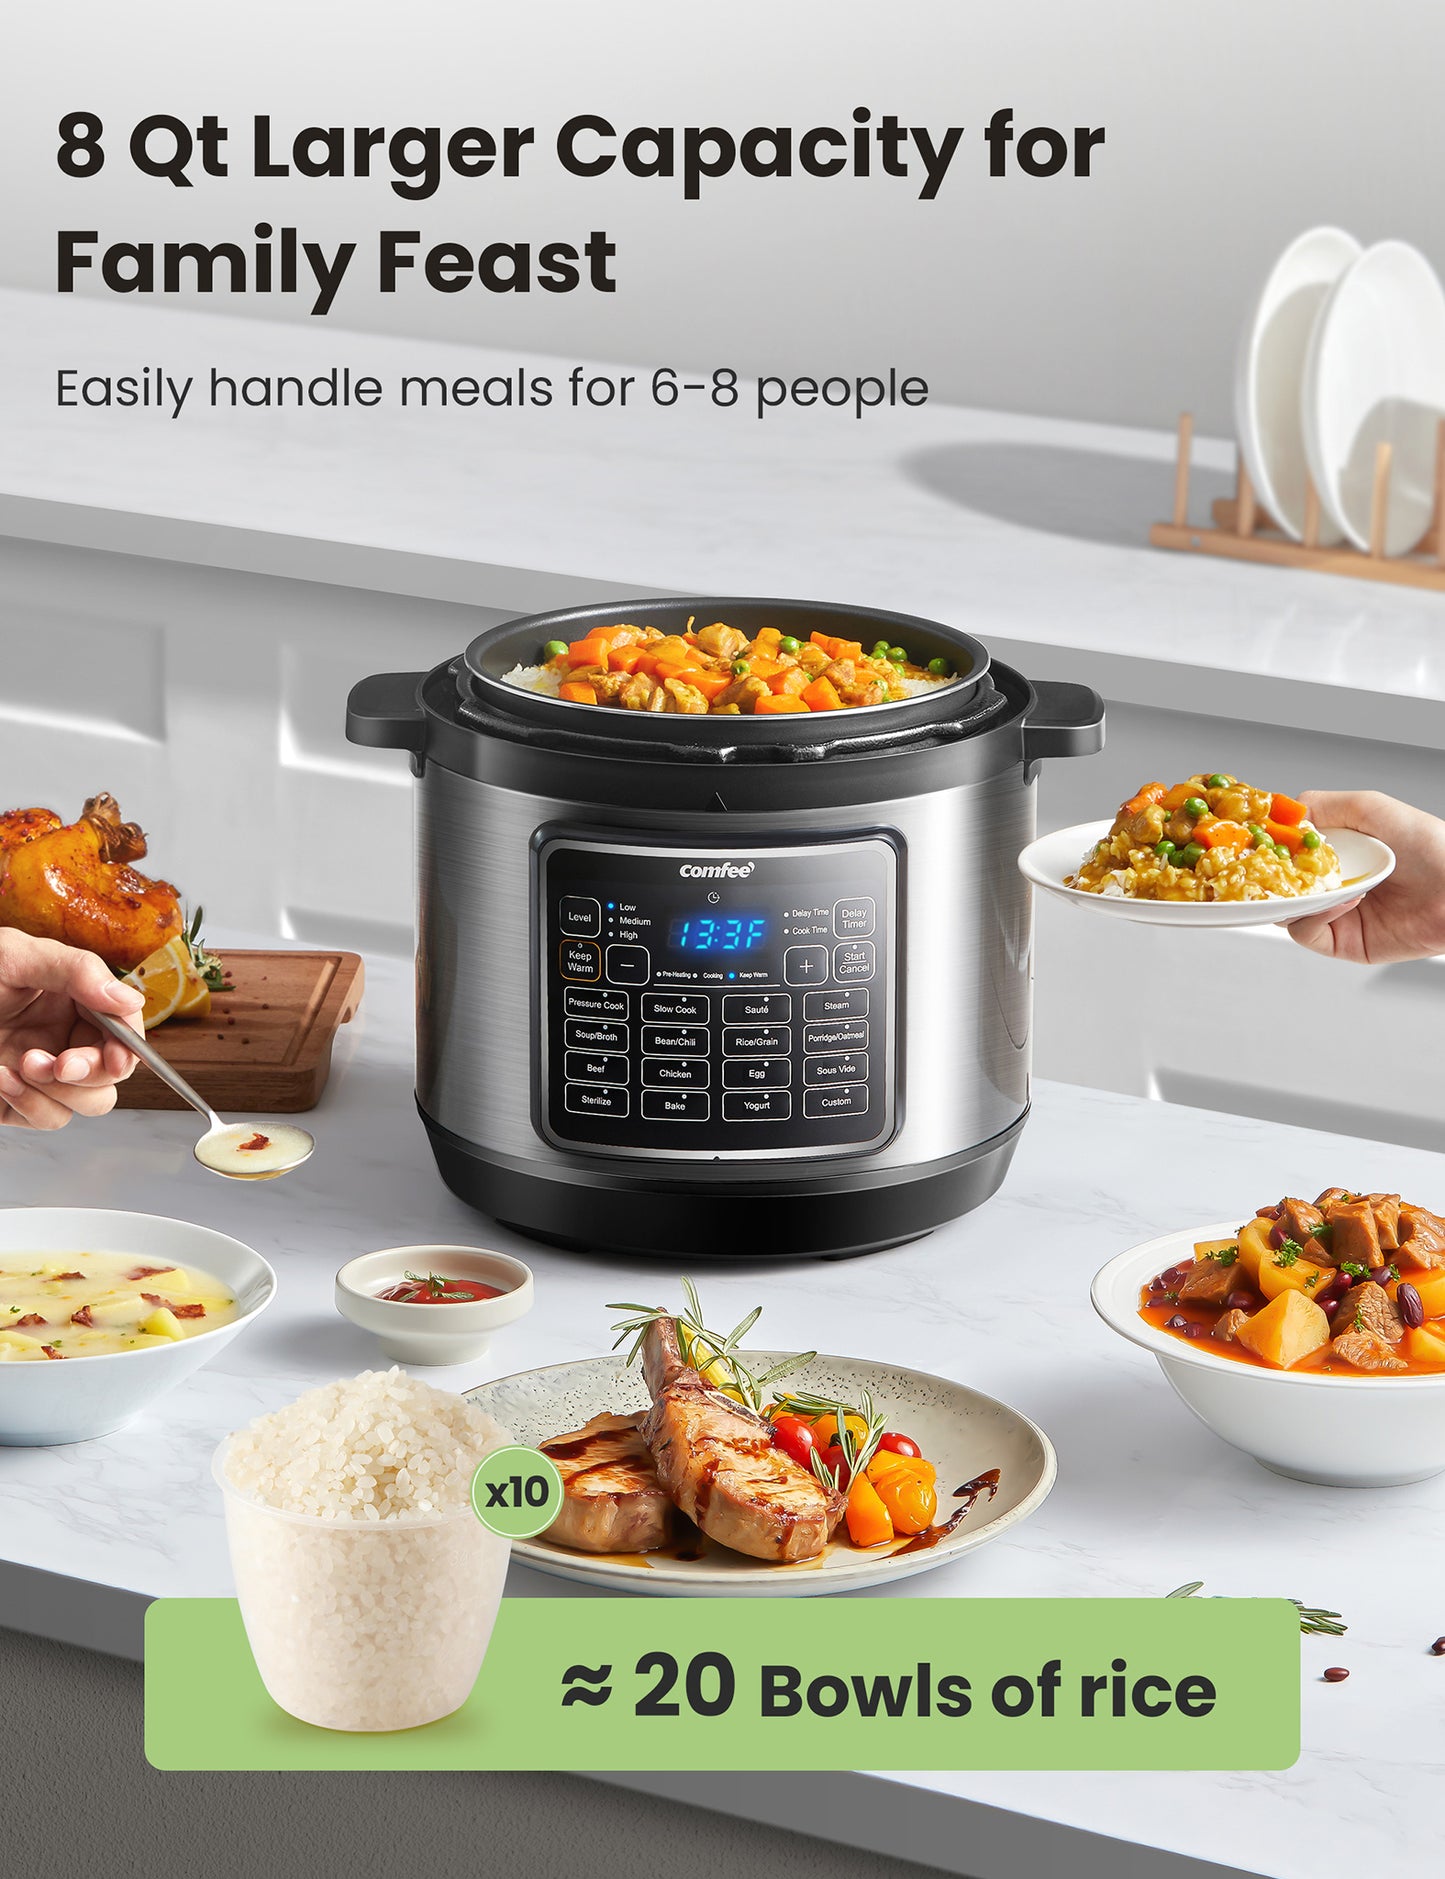 comfee pressure cooker with rice inside surrounded by various meals